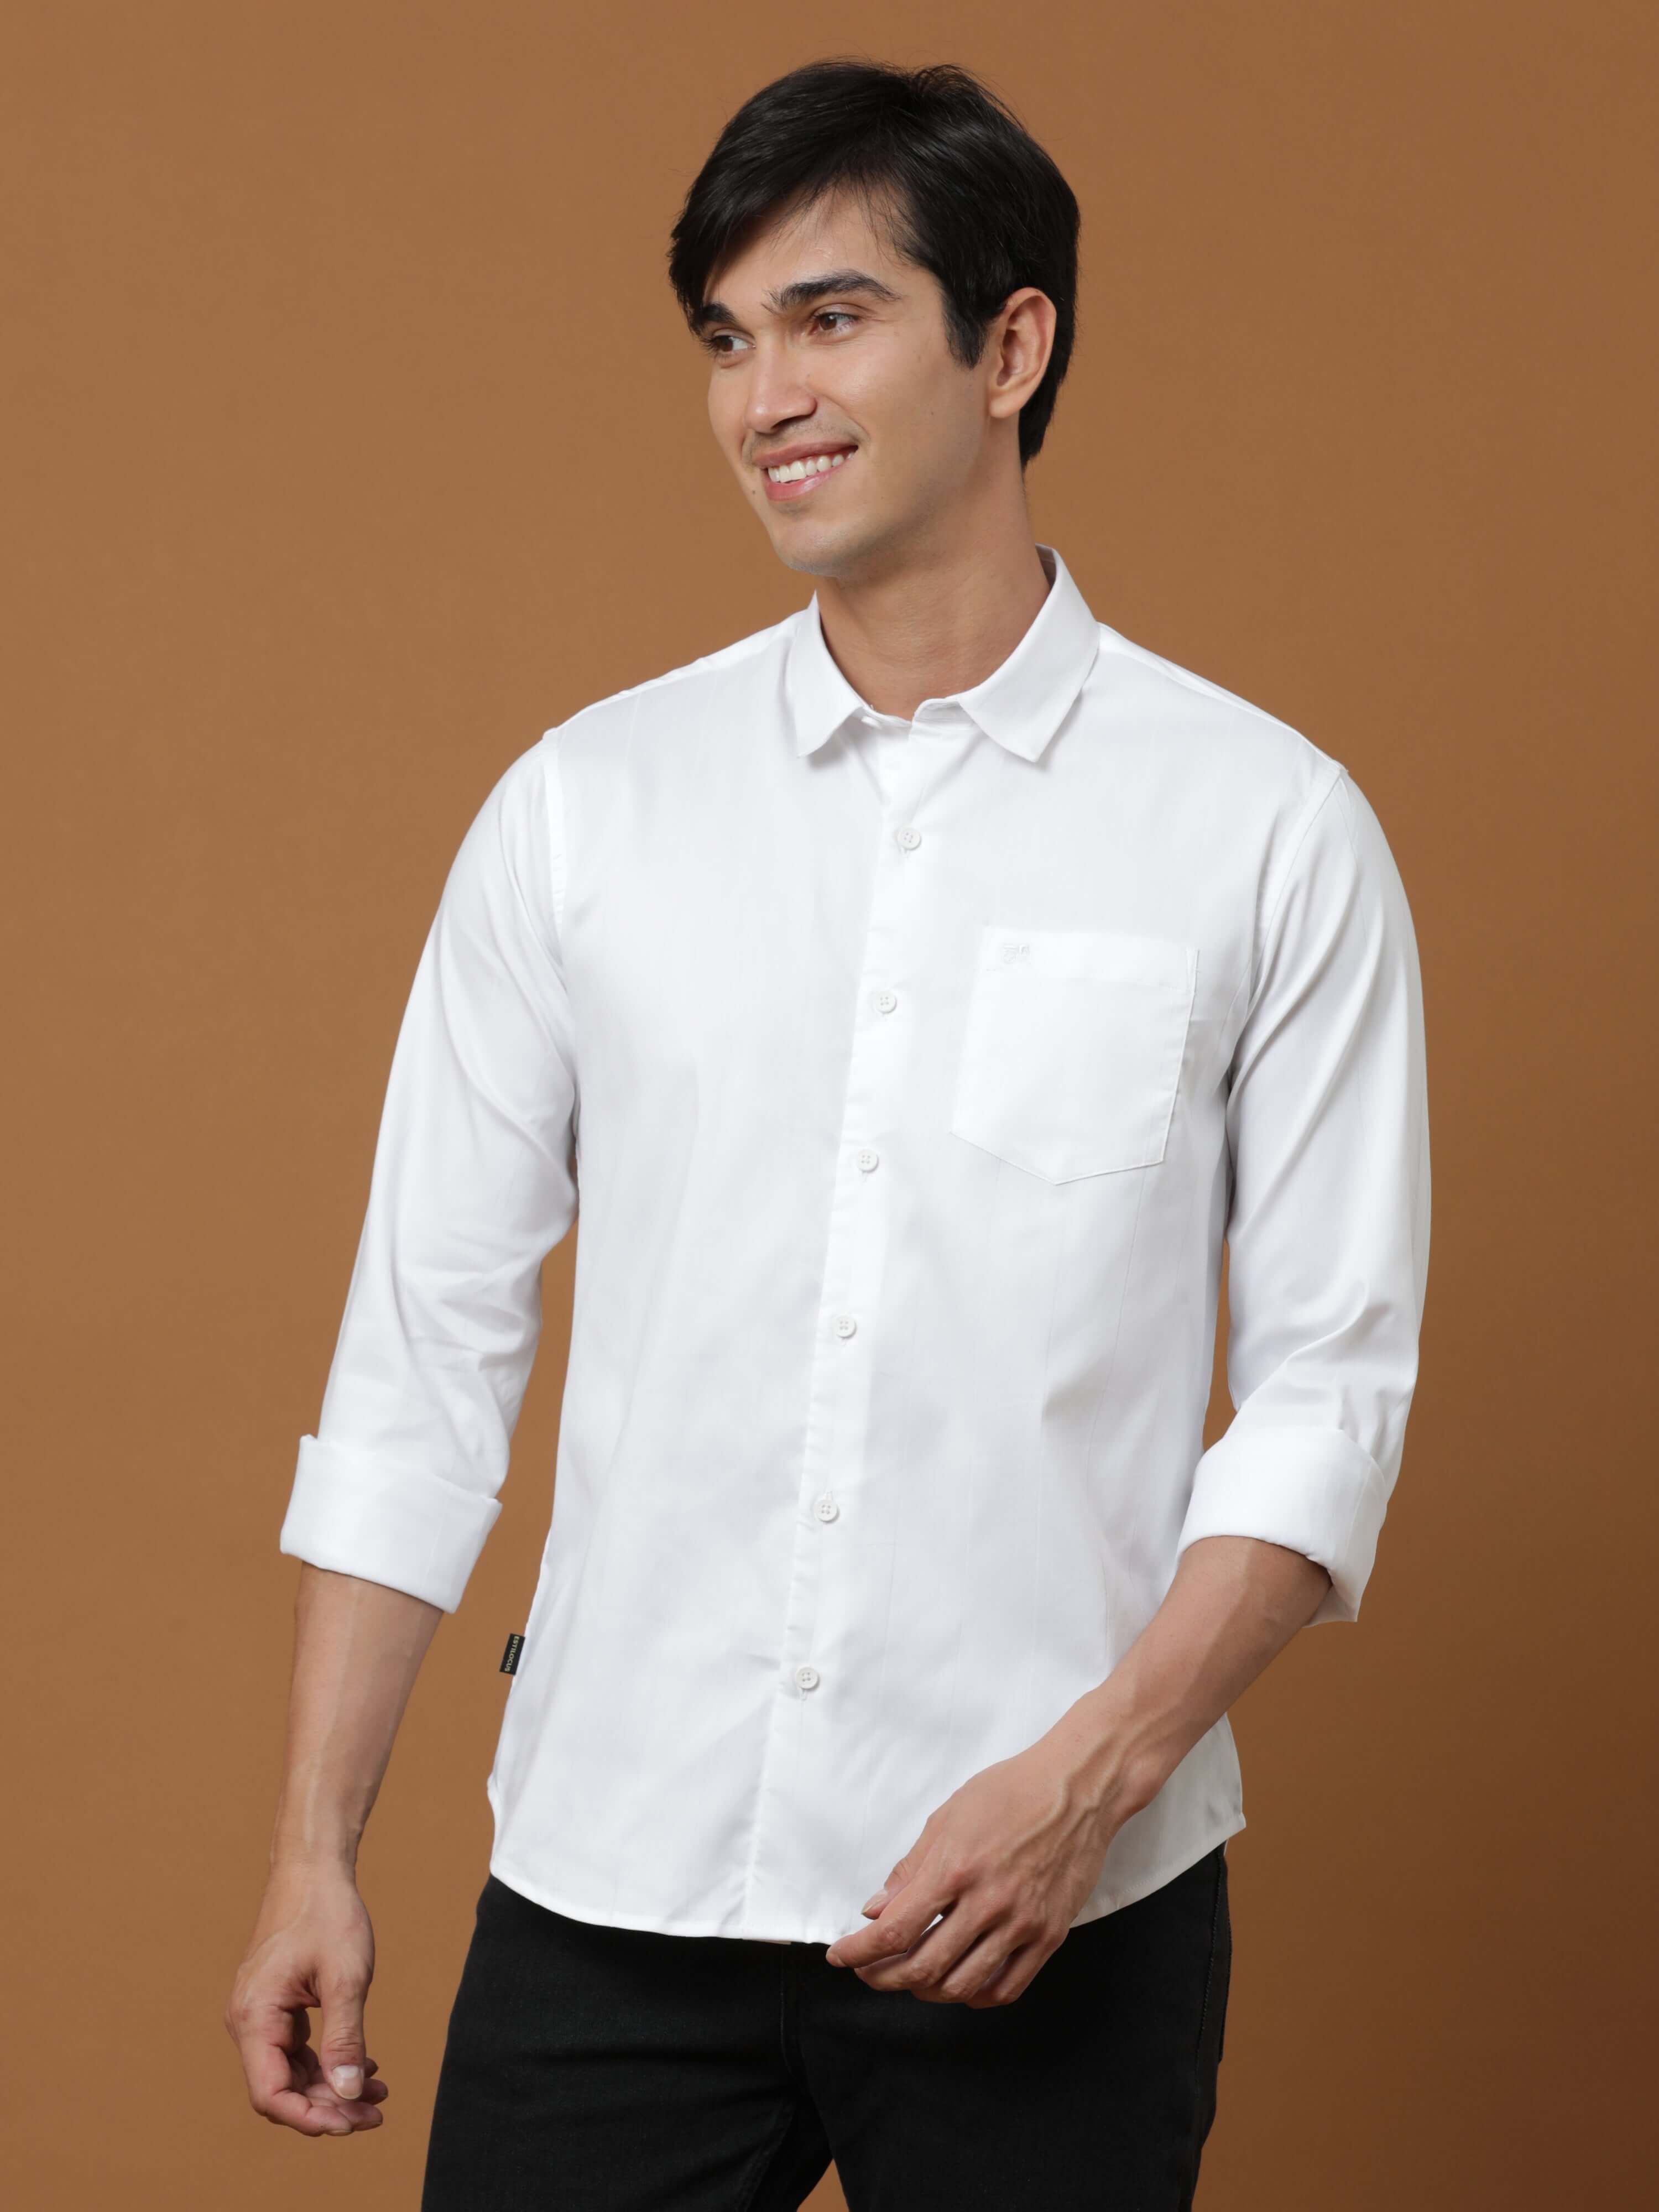 White Stripe Casual Shirt shop online at Estilocus. Poly Cotton Full-sleeve stripe shirt Self fold placket Regular collar Double button edge cuff Single pocket Curved bottom hemline Finest quality brand embroidery at front placket. All single needle const